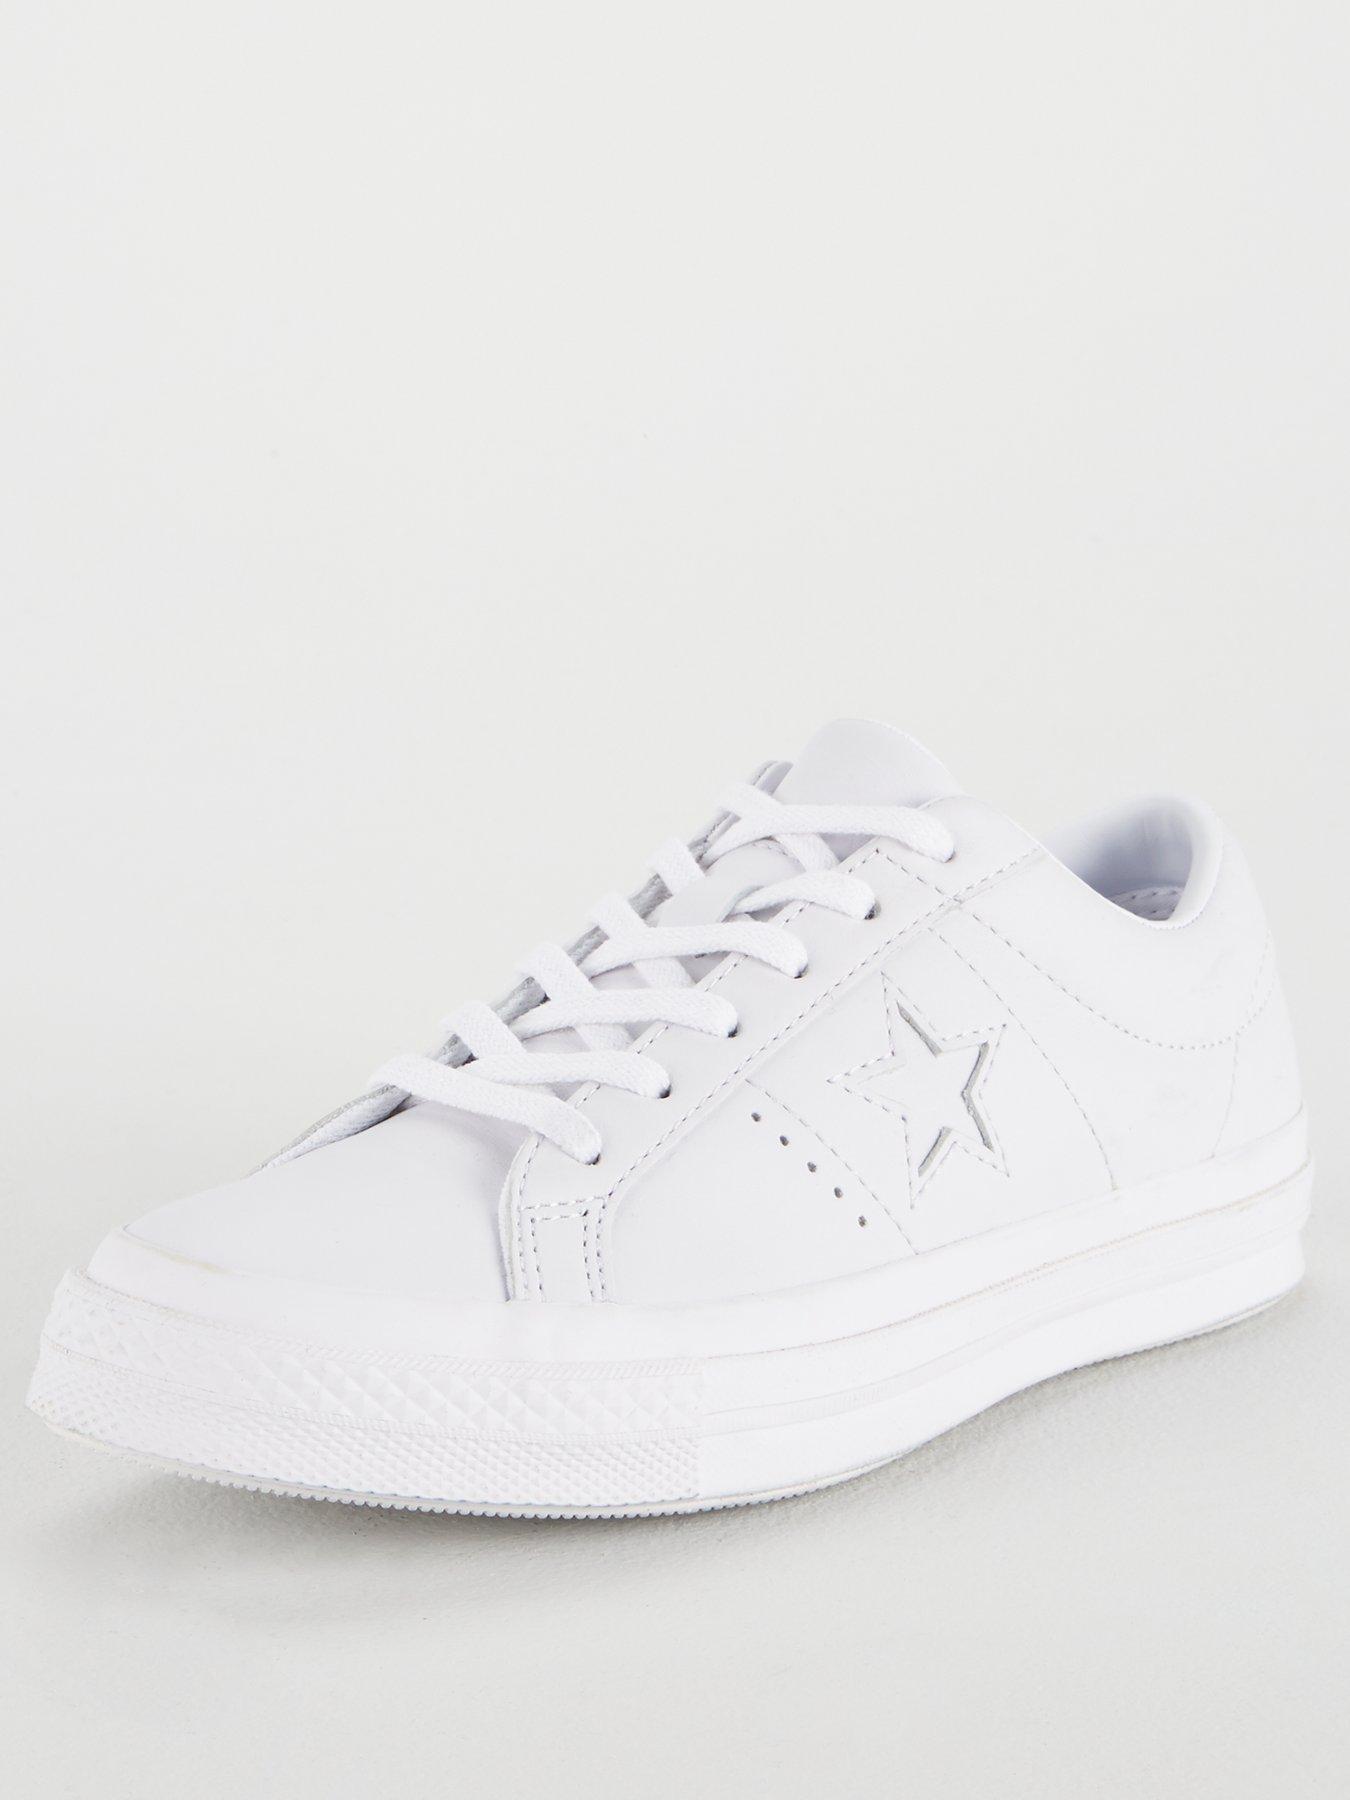 converse one star white leather womens